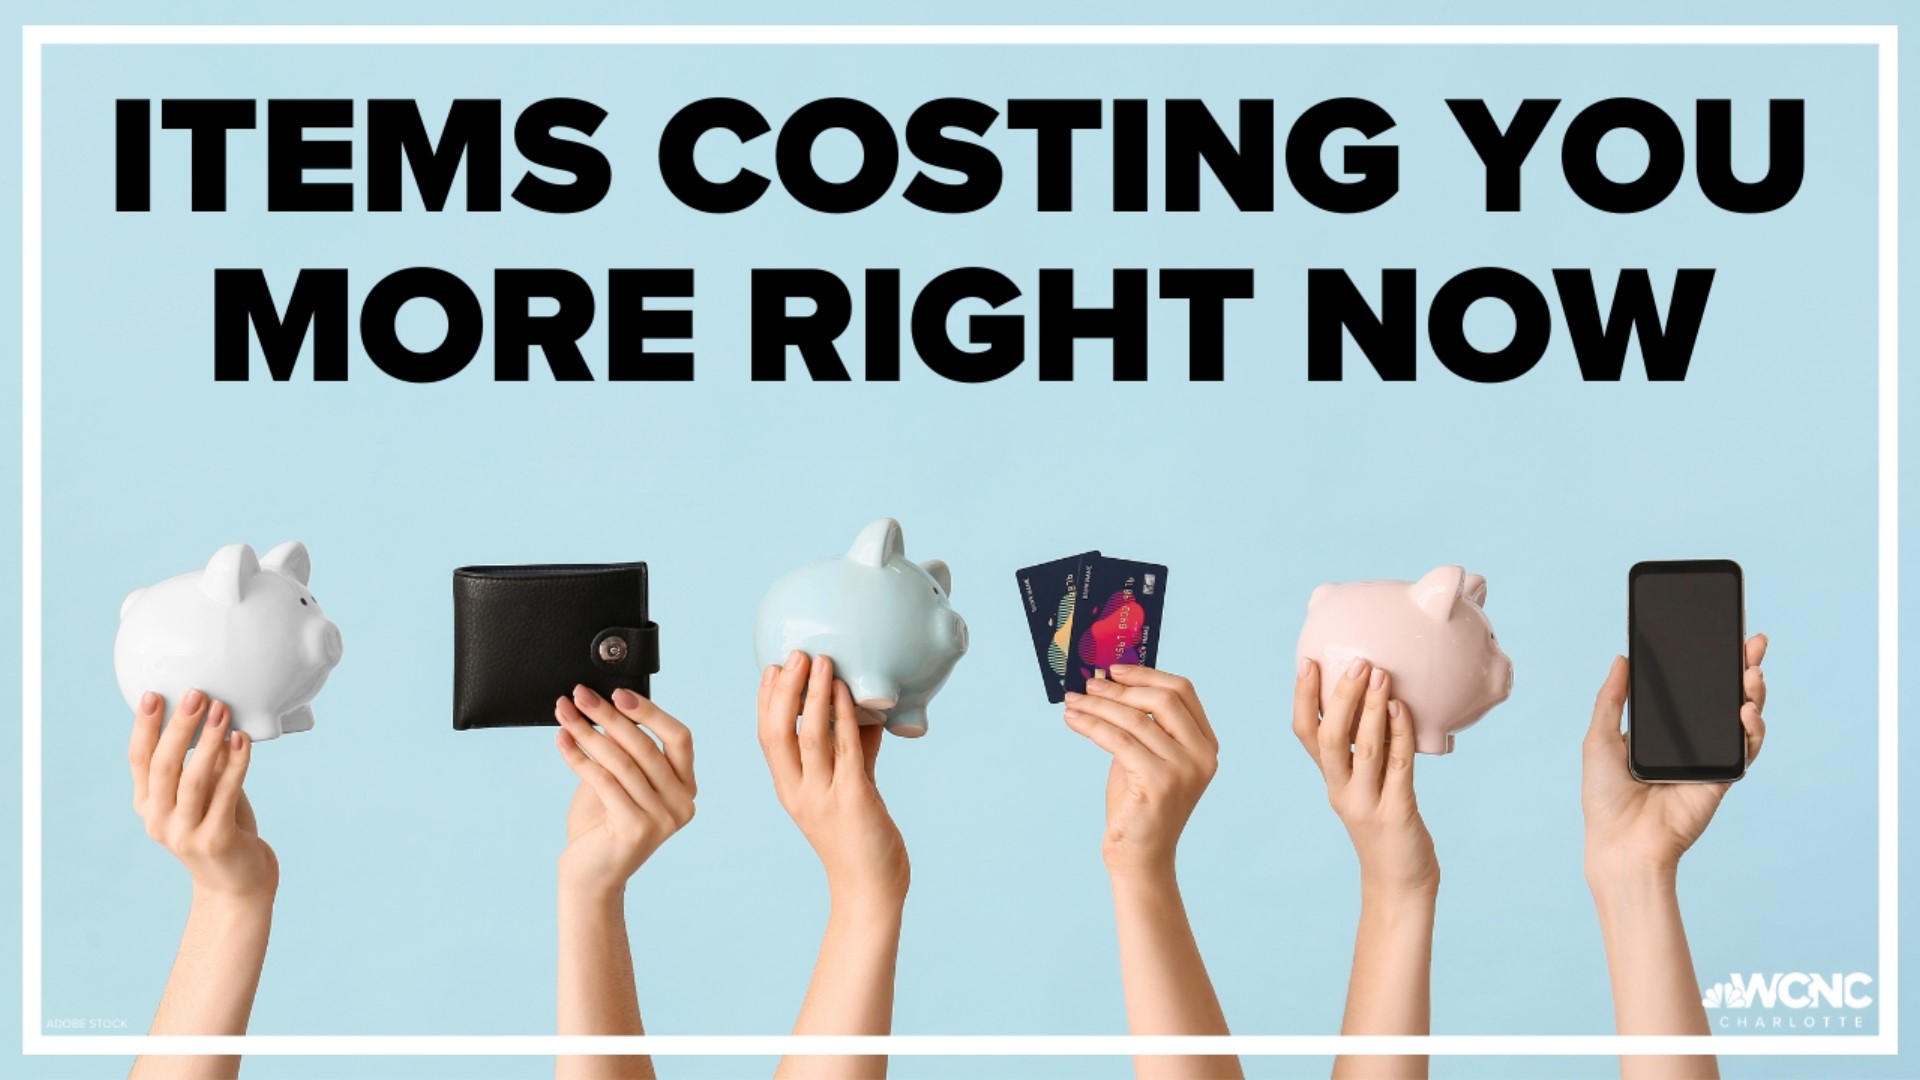 Everything is more expensive these days, but these four categories are hitting your wallet hardest.